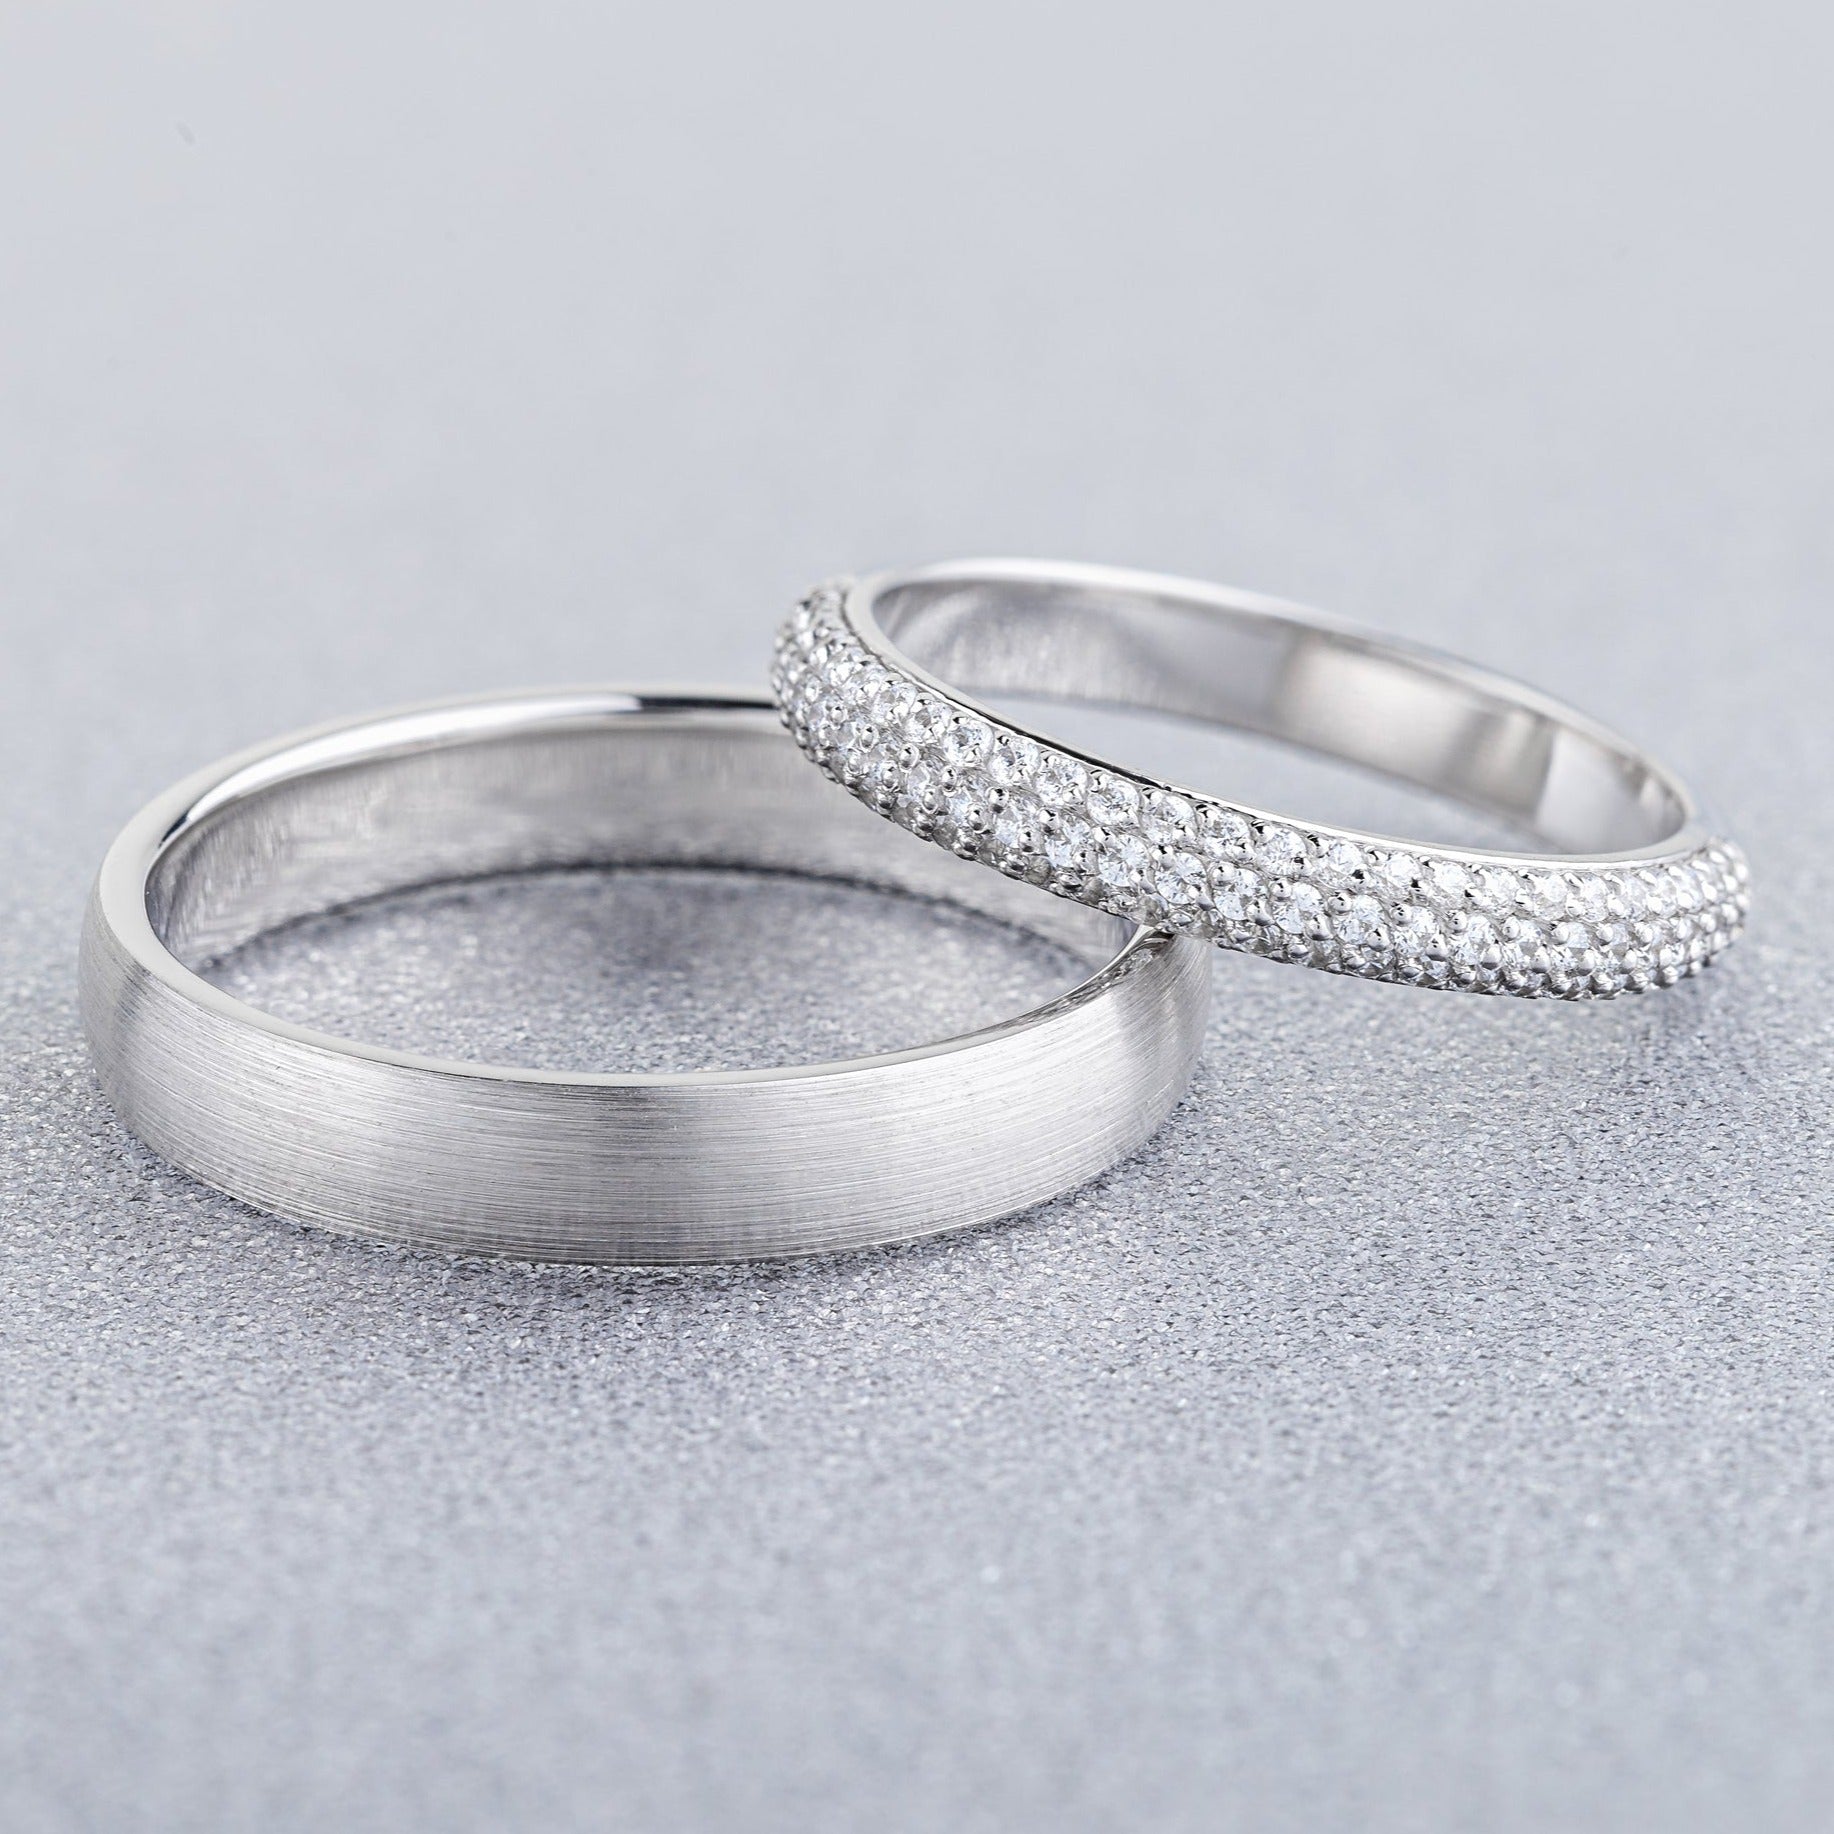 White gold wedding rings set with diamonds in her ring. His and hers wedding bands. Couple rings. Matching wedding rings set. Classic wedding bands with diamonds